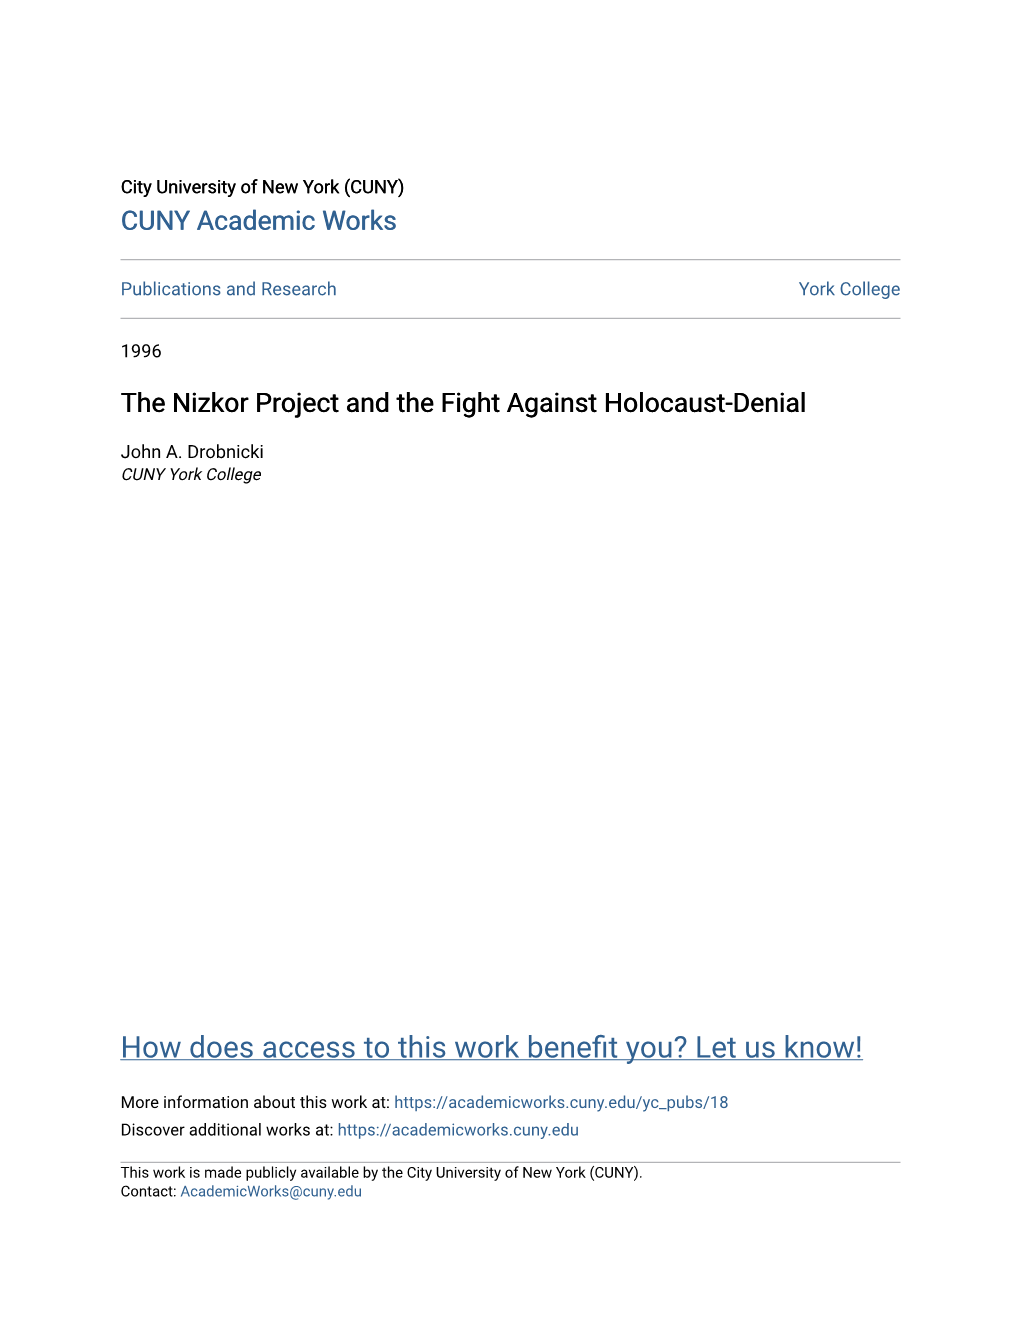 The Nizkor Project and the Fight Against Holocaust-Denial